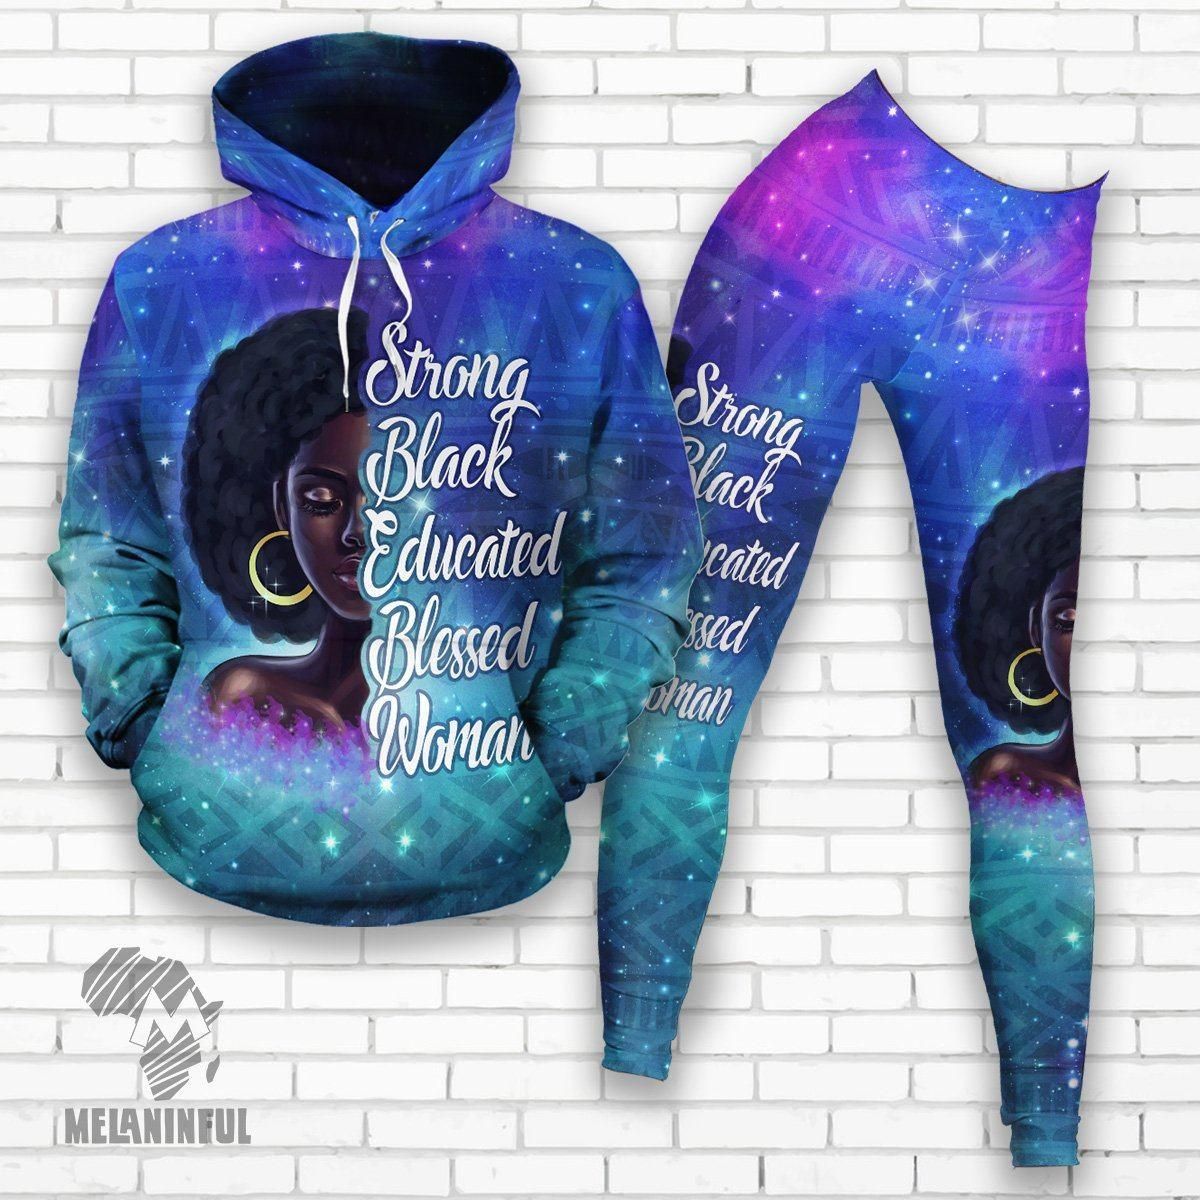 Strong Black Educated Blessed Woman Fleece All-over Hoodie And Legging Set